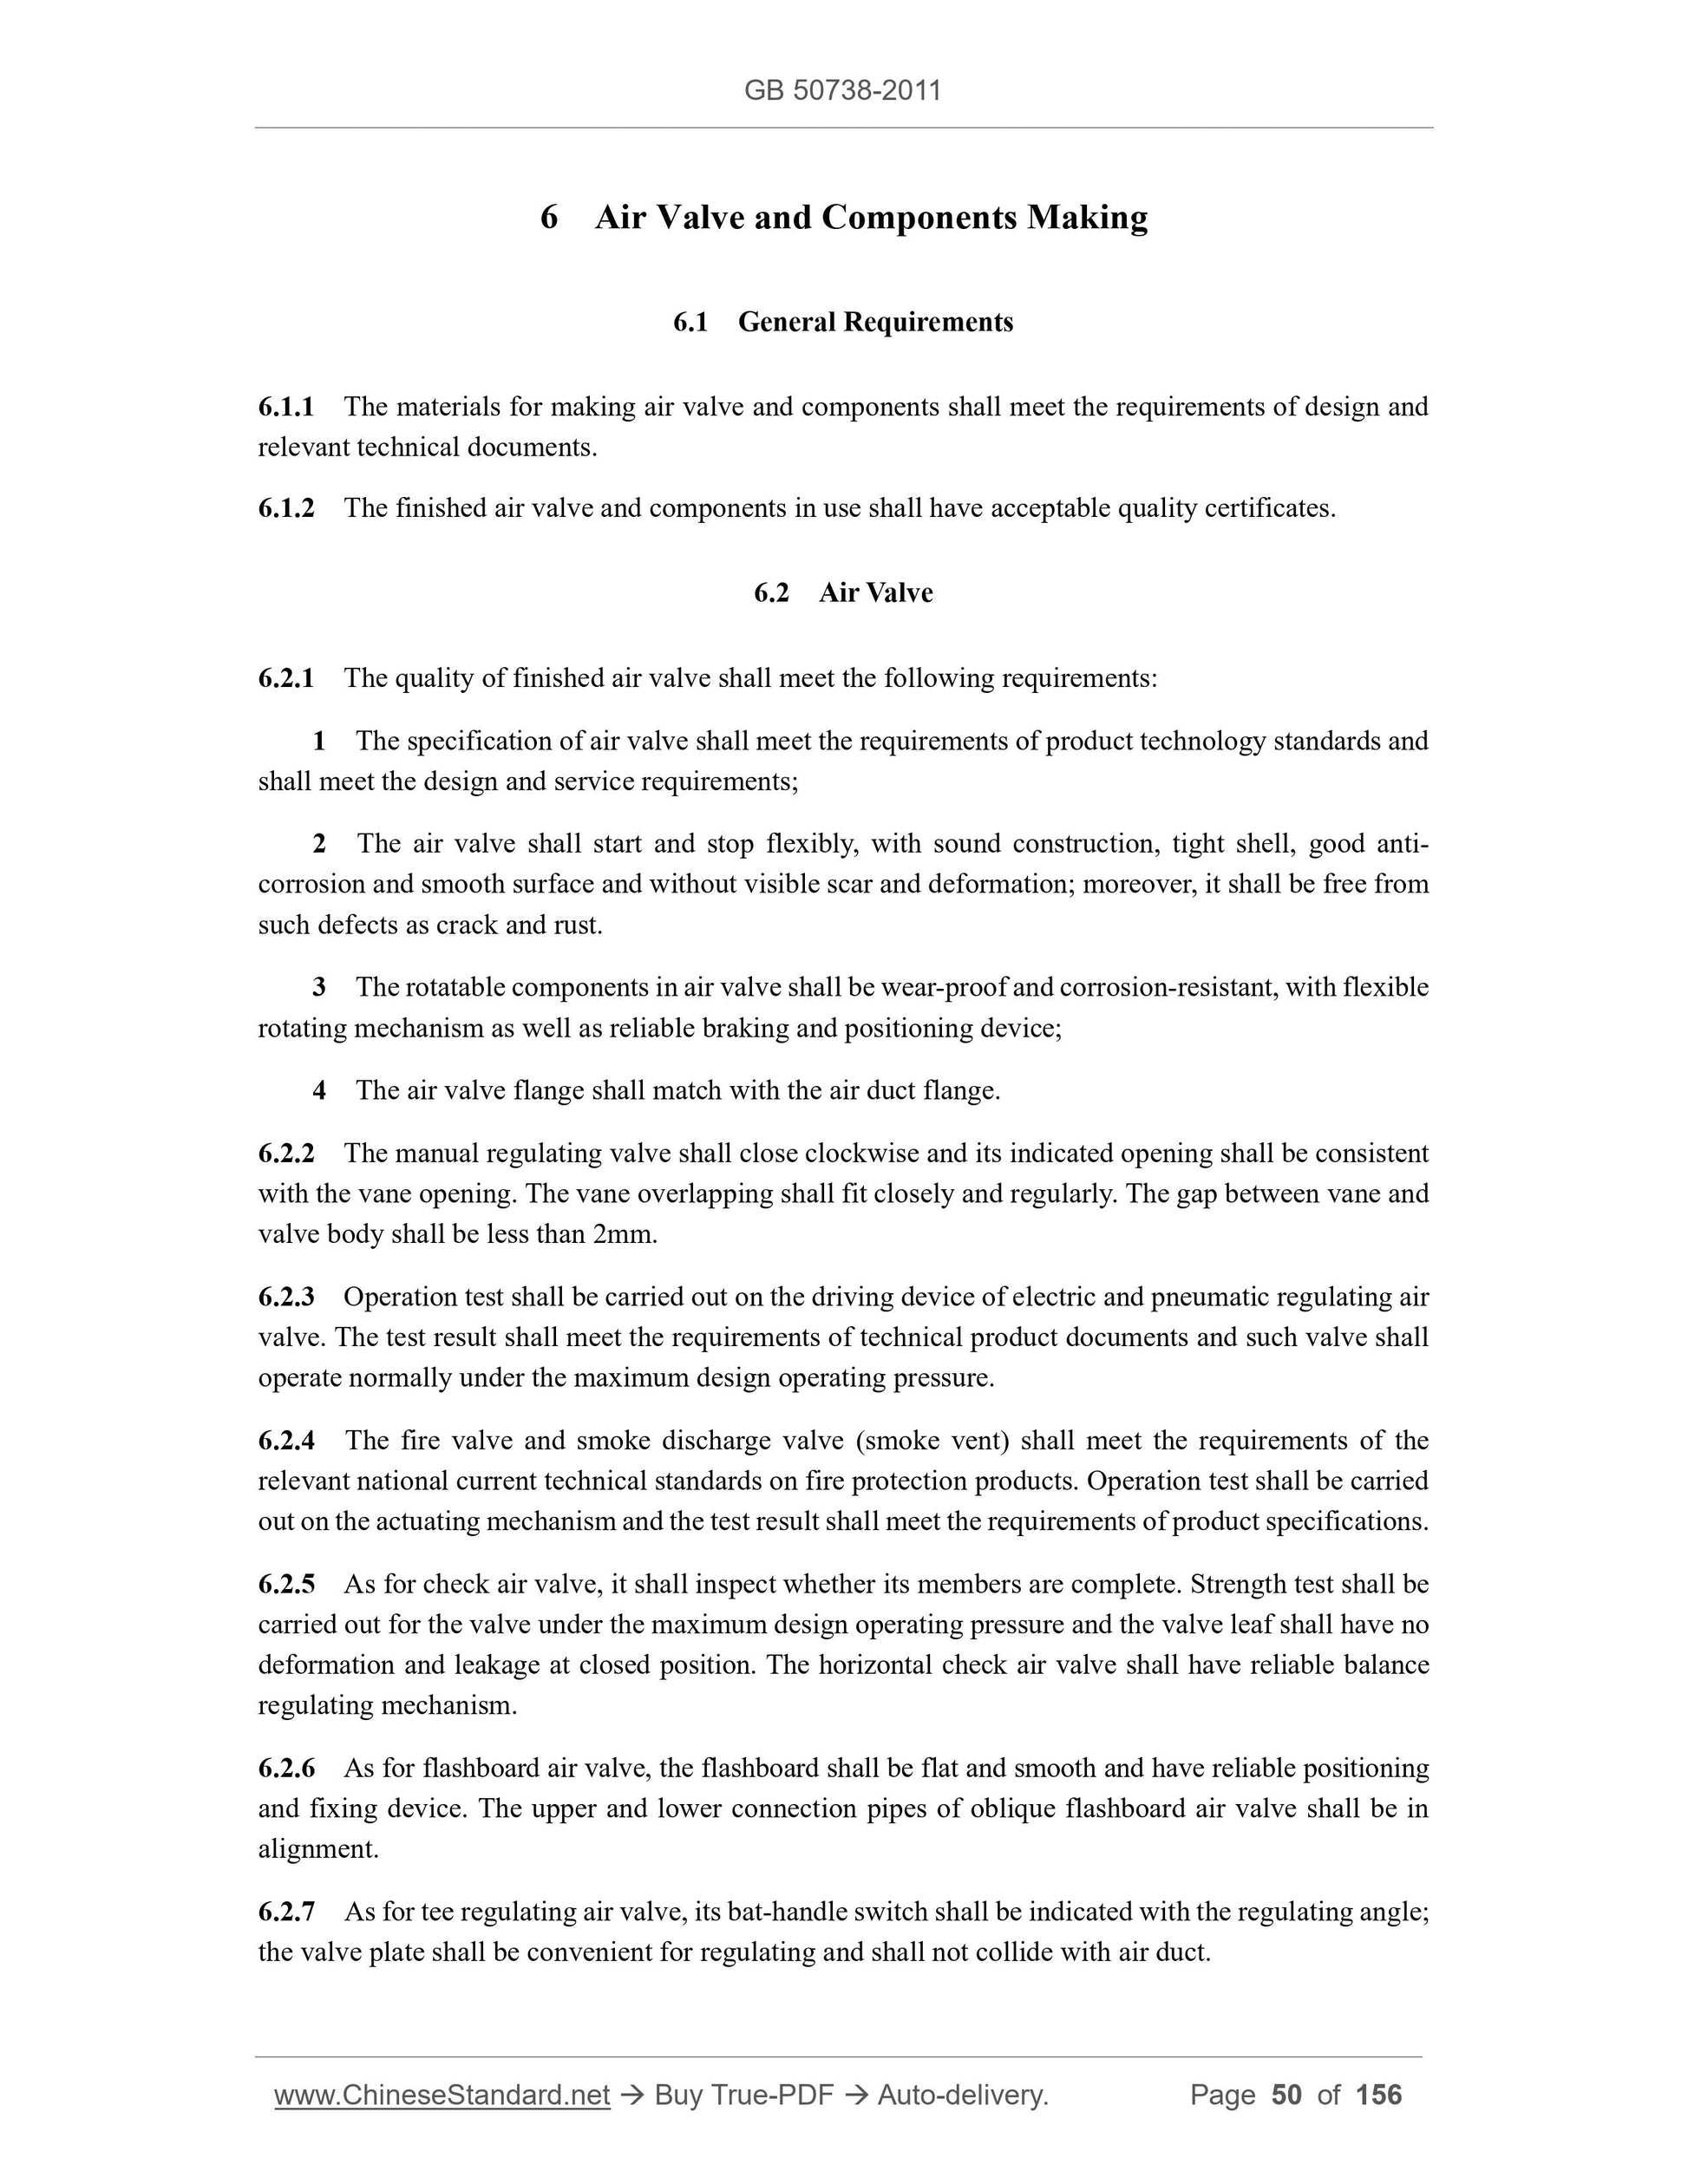 GB 50738-2011 Page 8